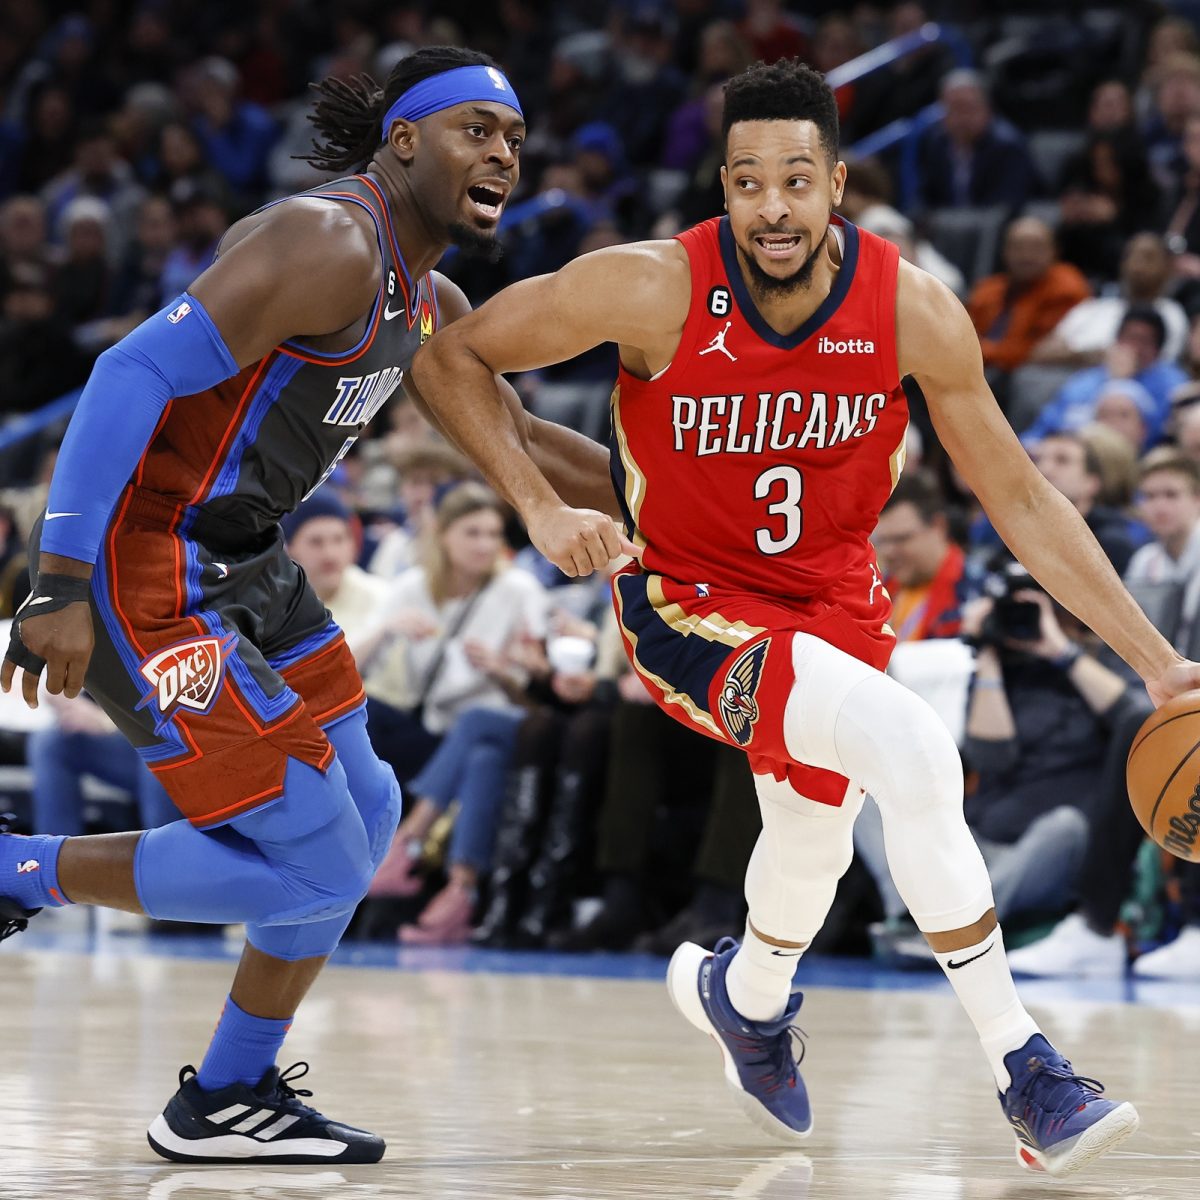 Minnesota Timberwolves vs. New Orleans Pelicans Prediction, Preview, and Odds - 1-25-2023